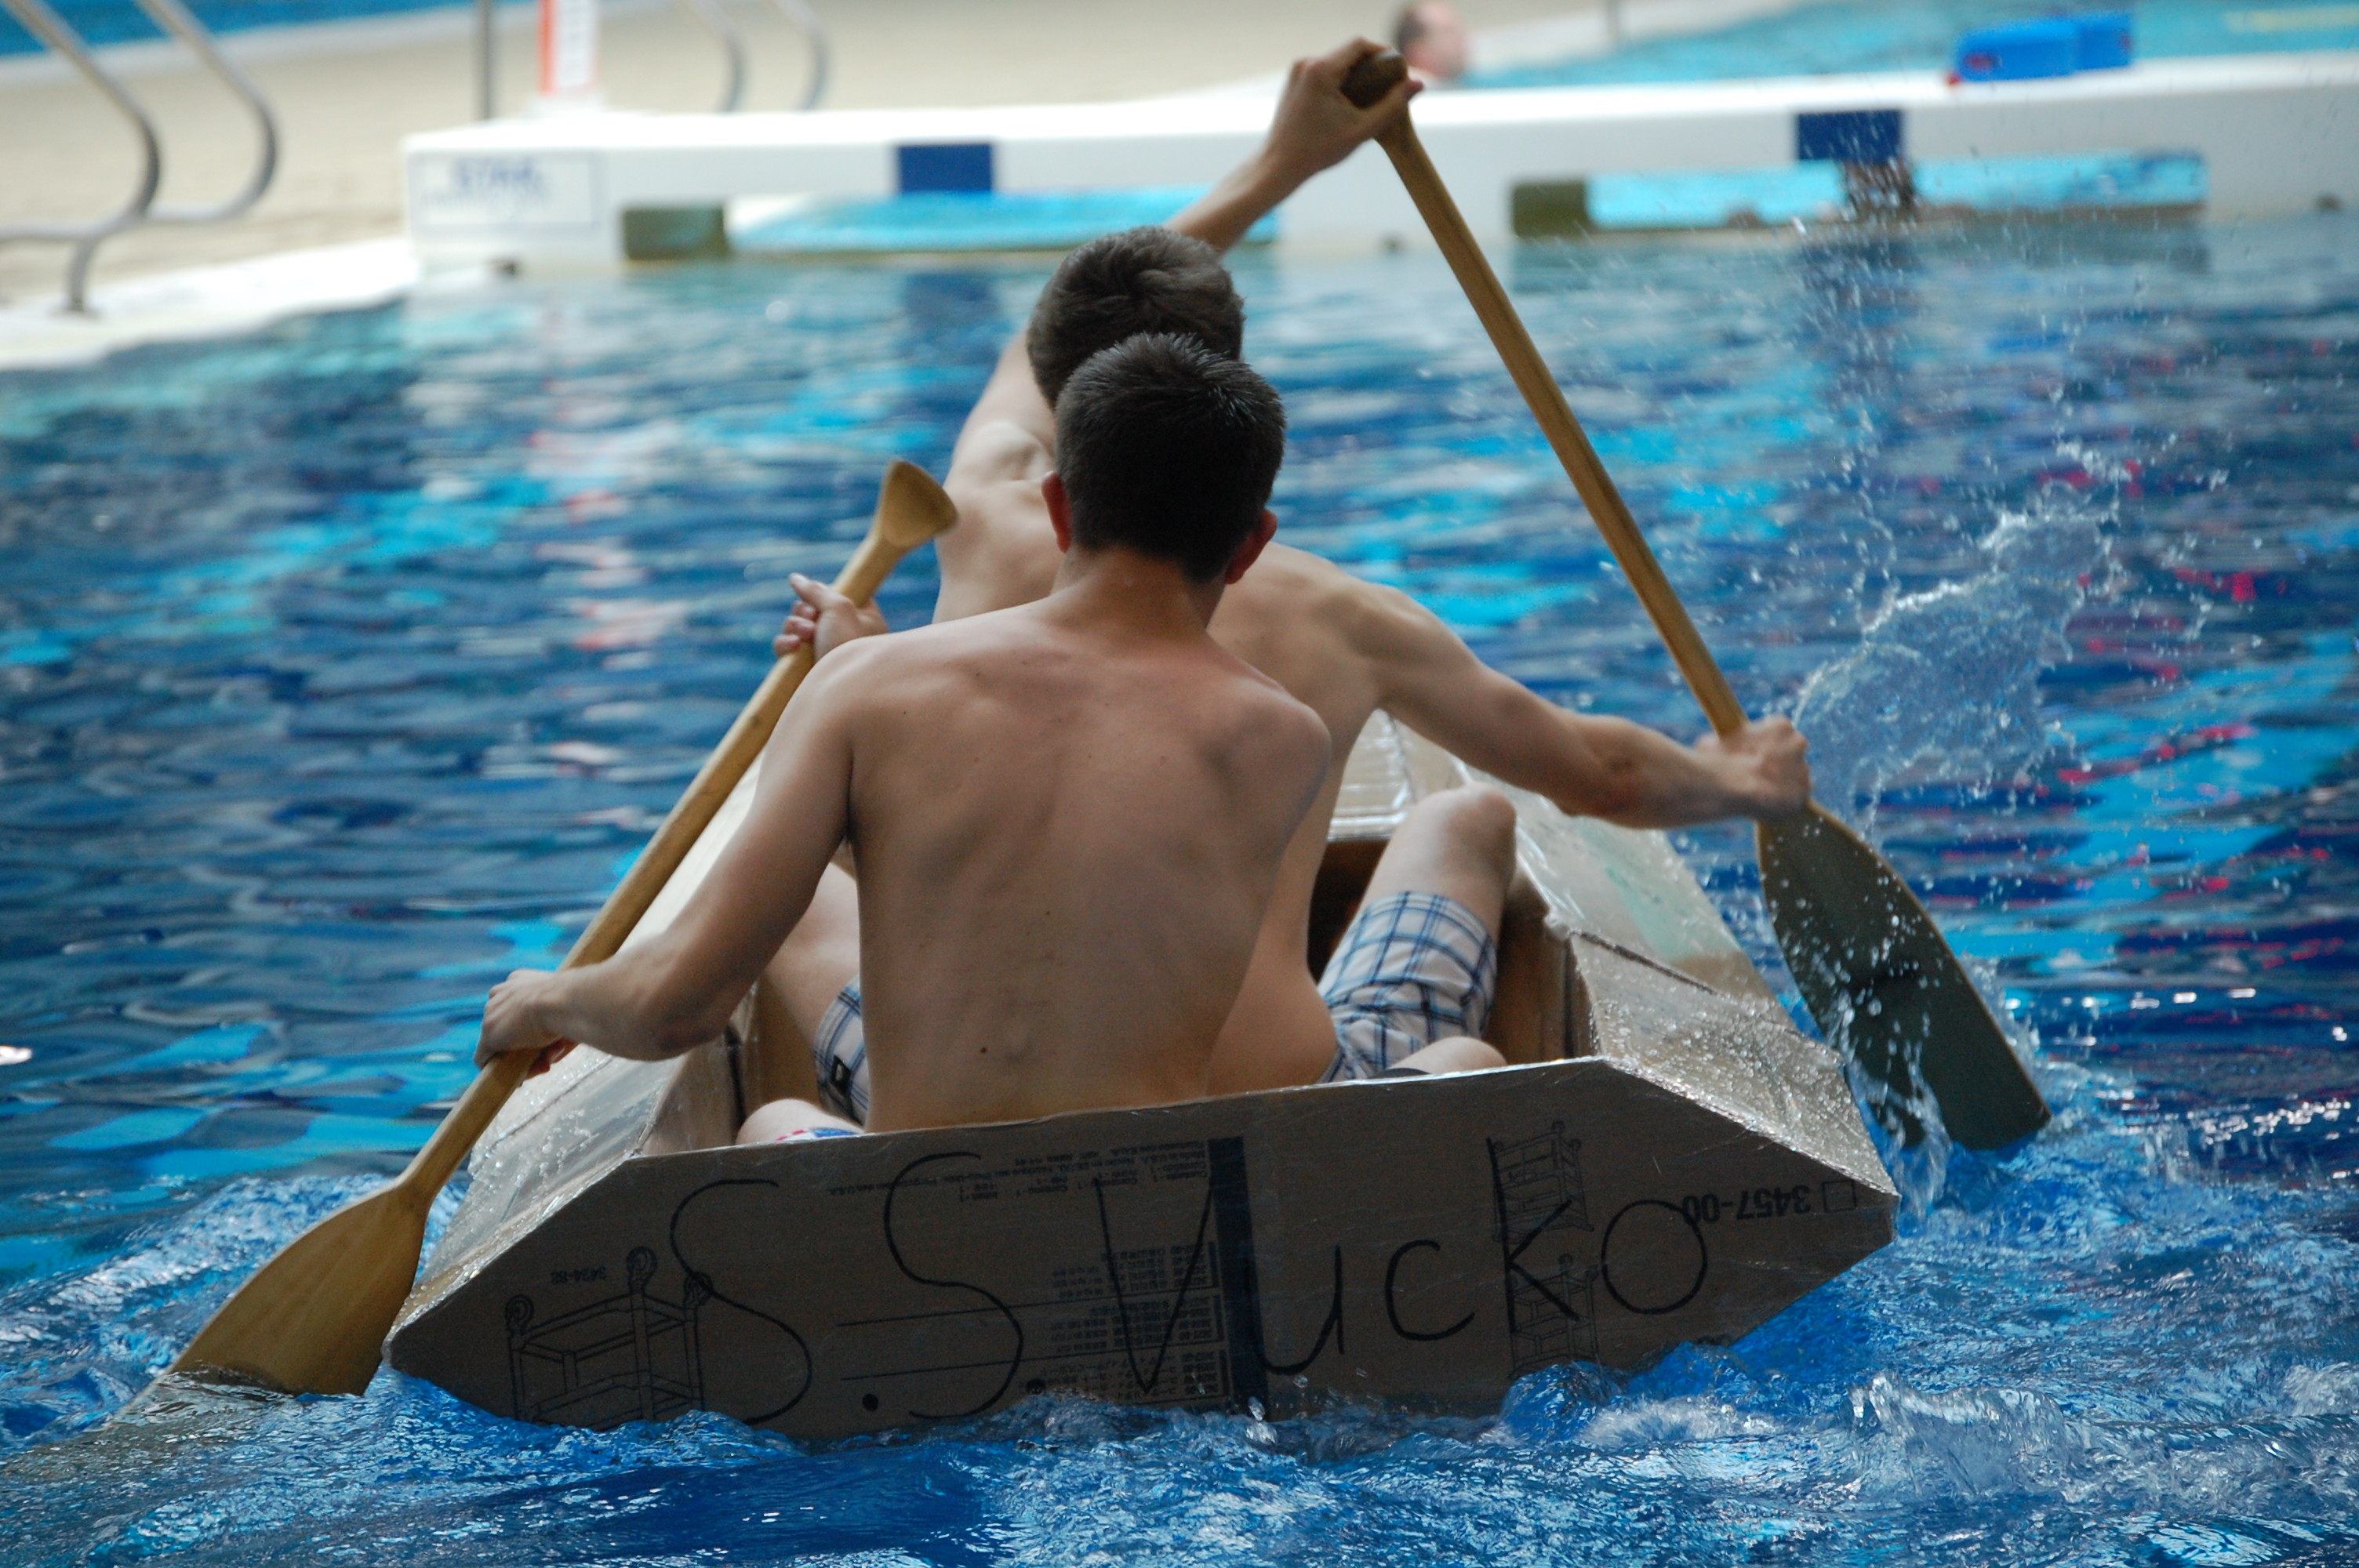 cardboard boat competition